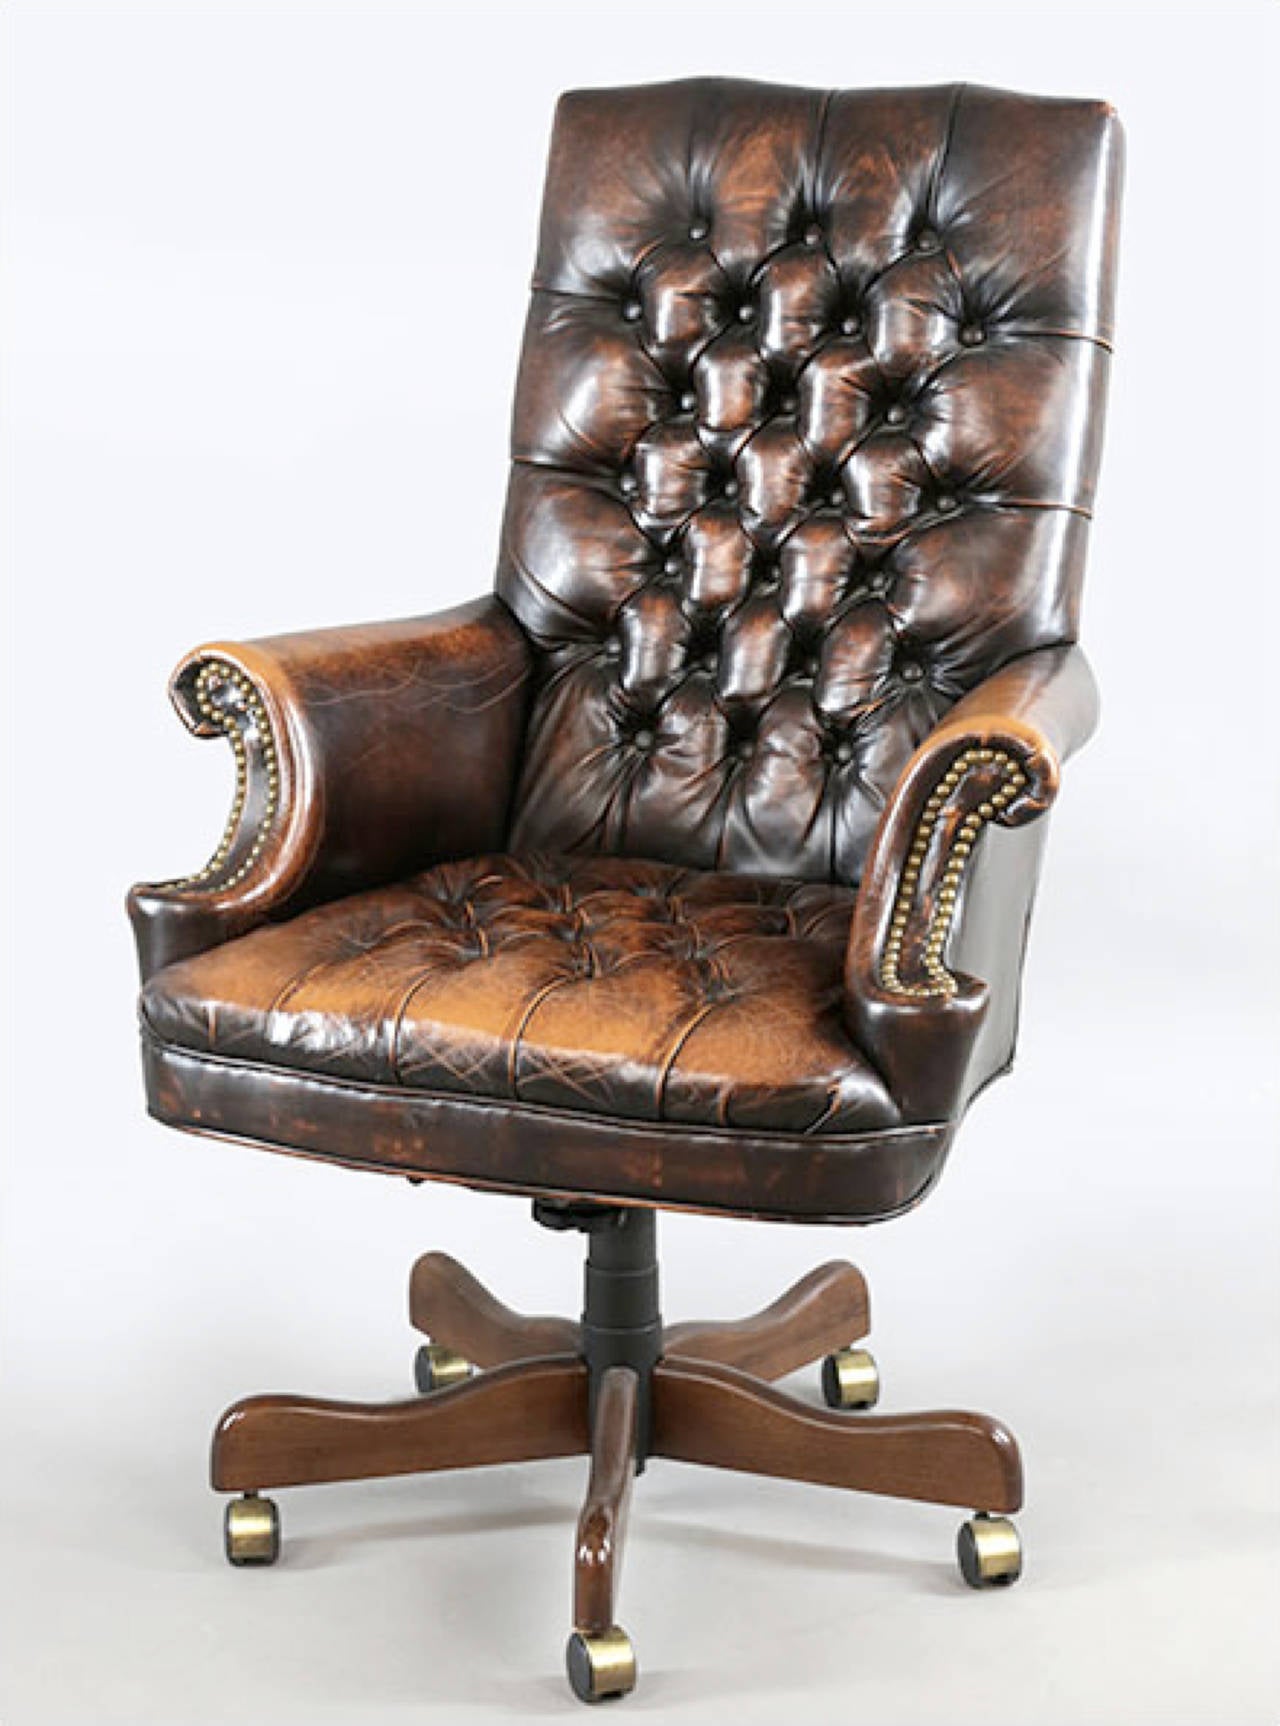 Handsome leather executive chair with lovely worn patina.